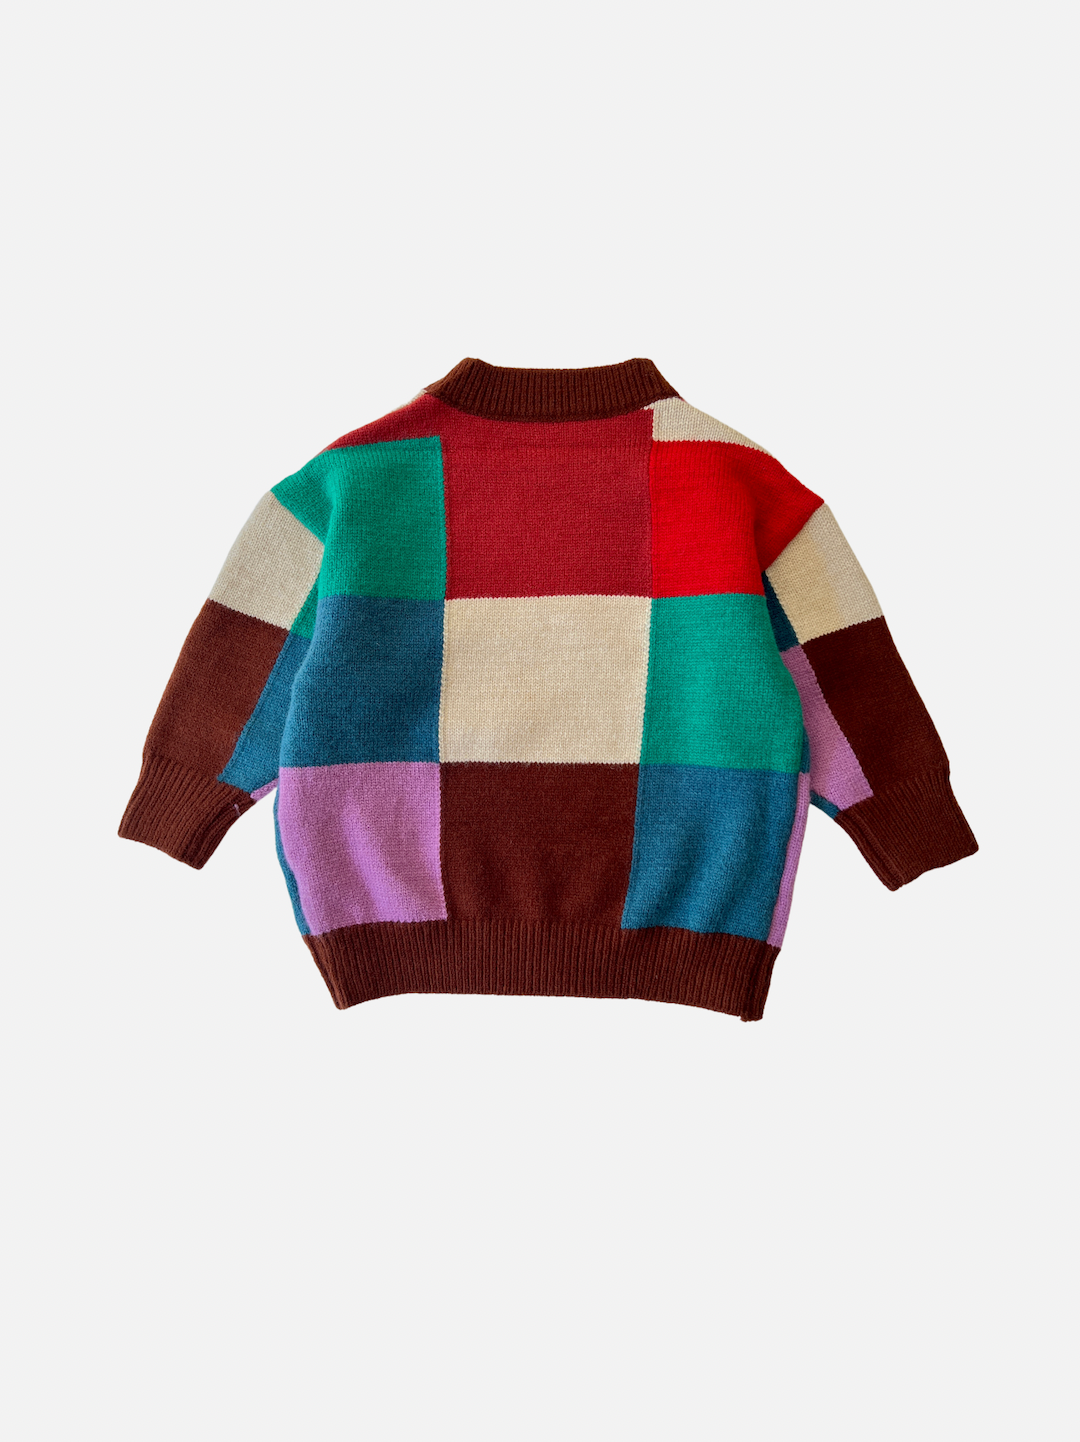 A kids' colorblock sweater in shades of red, pink, blue, green, cream and brown, back view